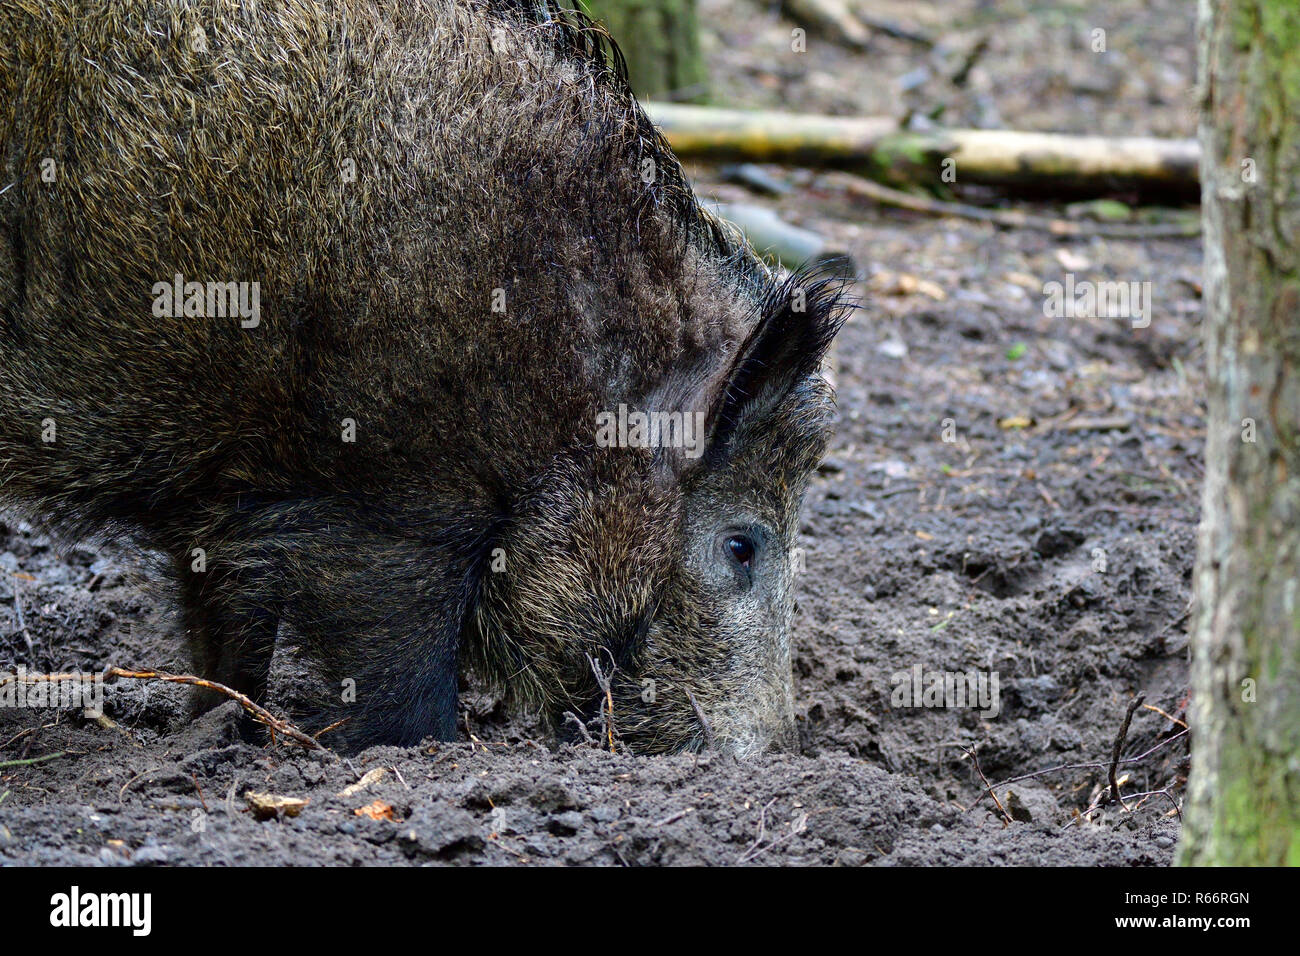 boar digs in the forest floor Stock Photo